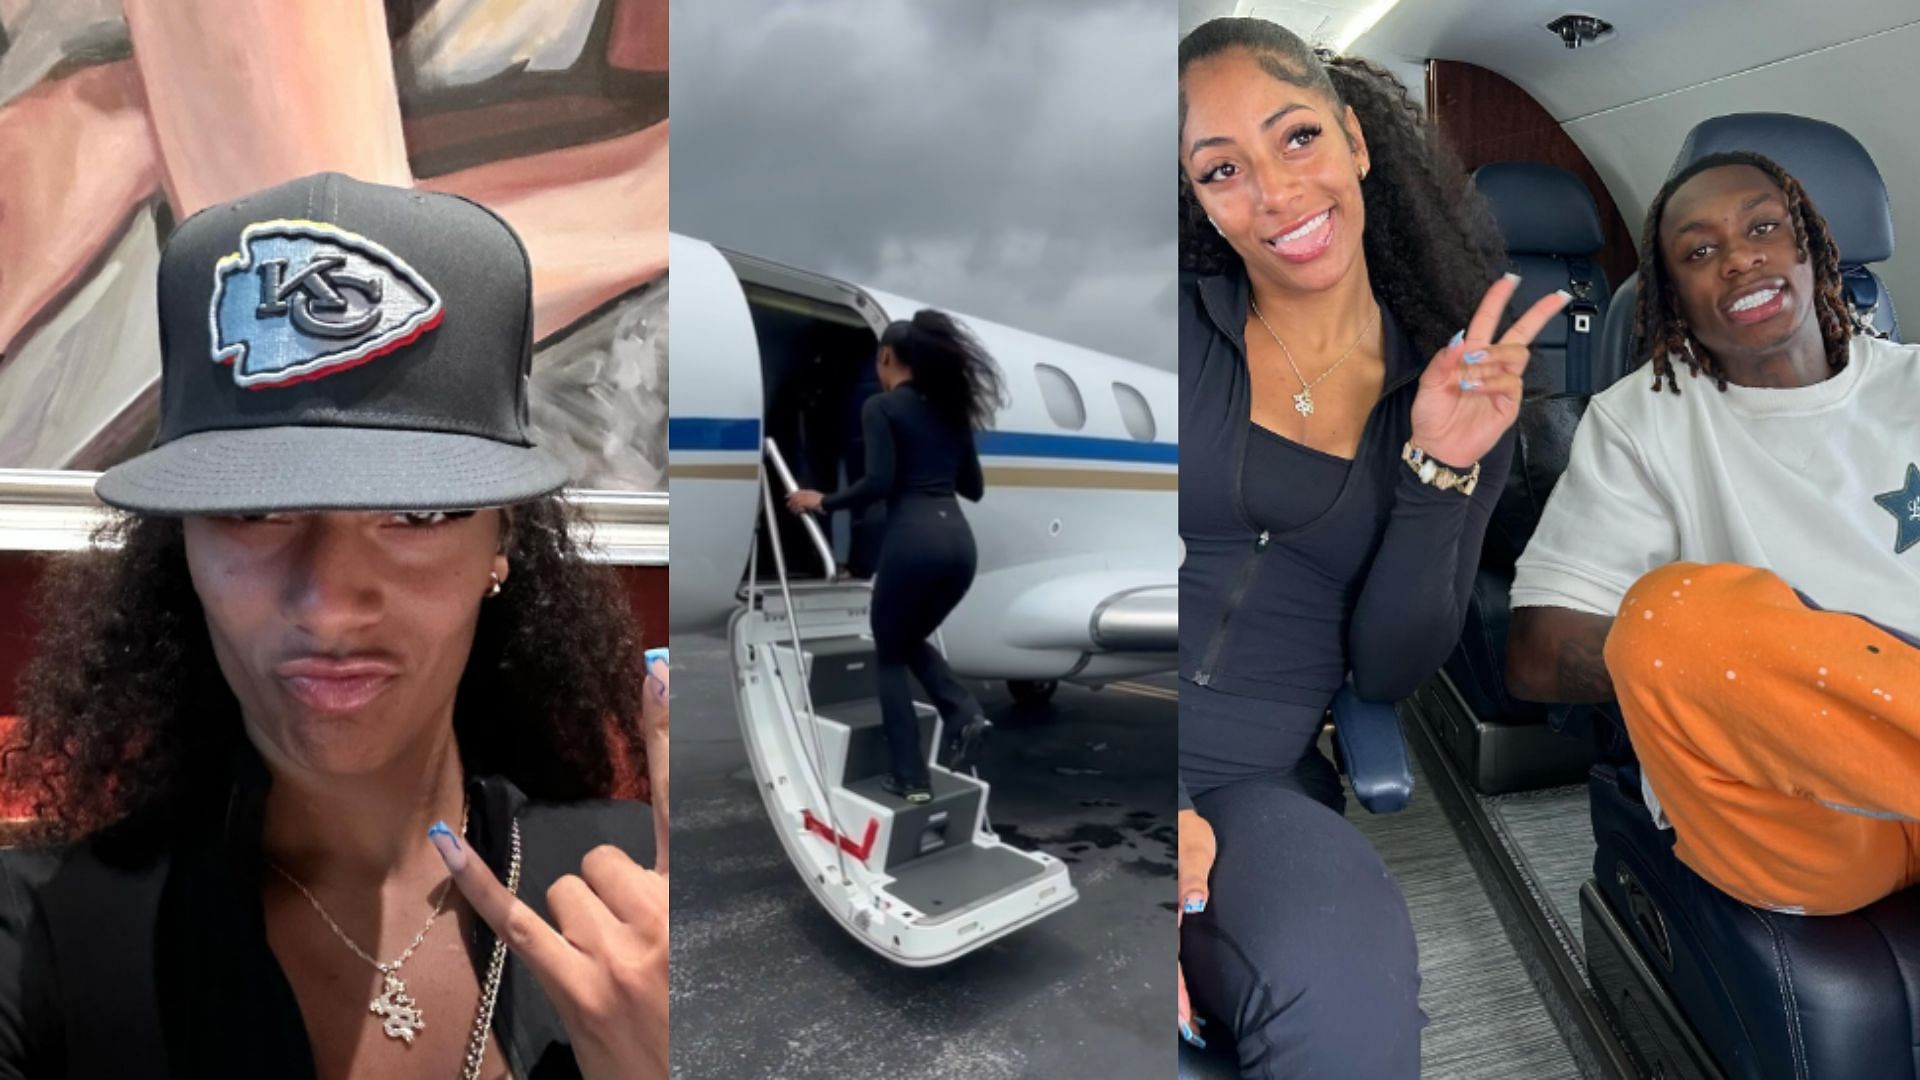 Worthy and Tia Jones jetting off to Kansas City after getting drafted by the Chiefs.